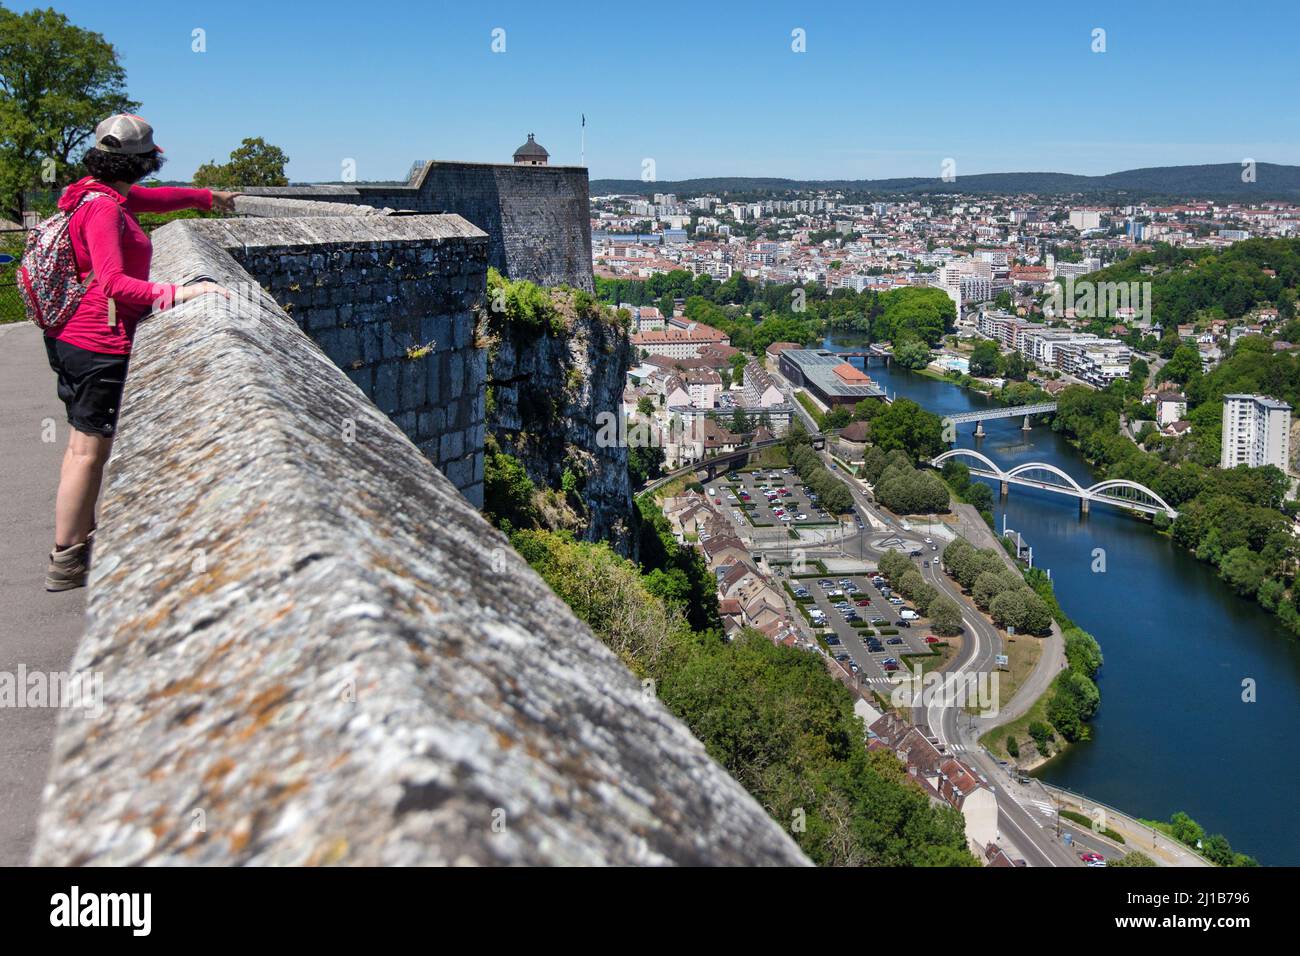 VIEW FROM THE TOP OF THE CITADEL'S RAMPARTS OVER THE CITY OF BESANCON, THE CHARDONNET BRIDGE AND THE NEUFCHATEL ROUNDABOUT, BESANCON, (25) DOUBS, REGION BOURGOGNE-FRANCHE-COMTE, FRANCE Stock Photo